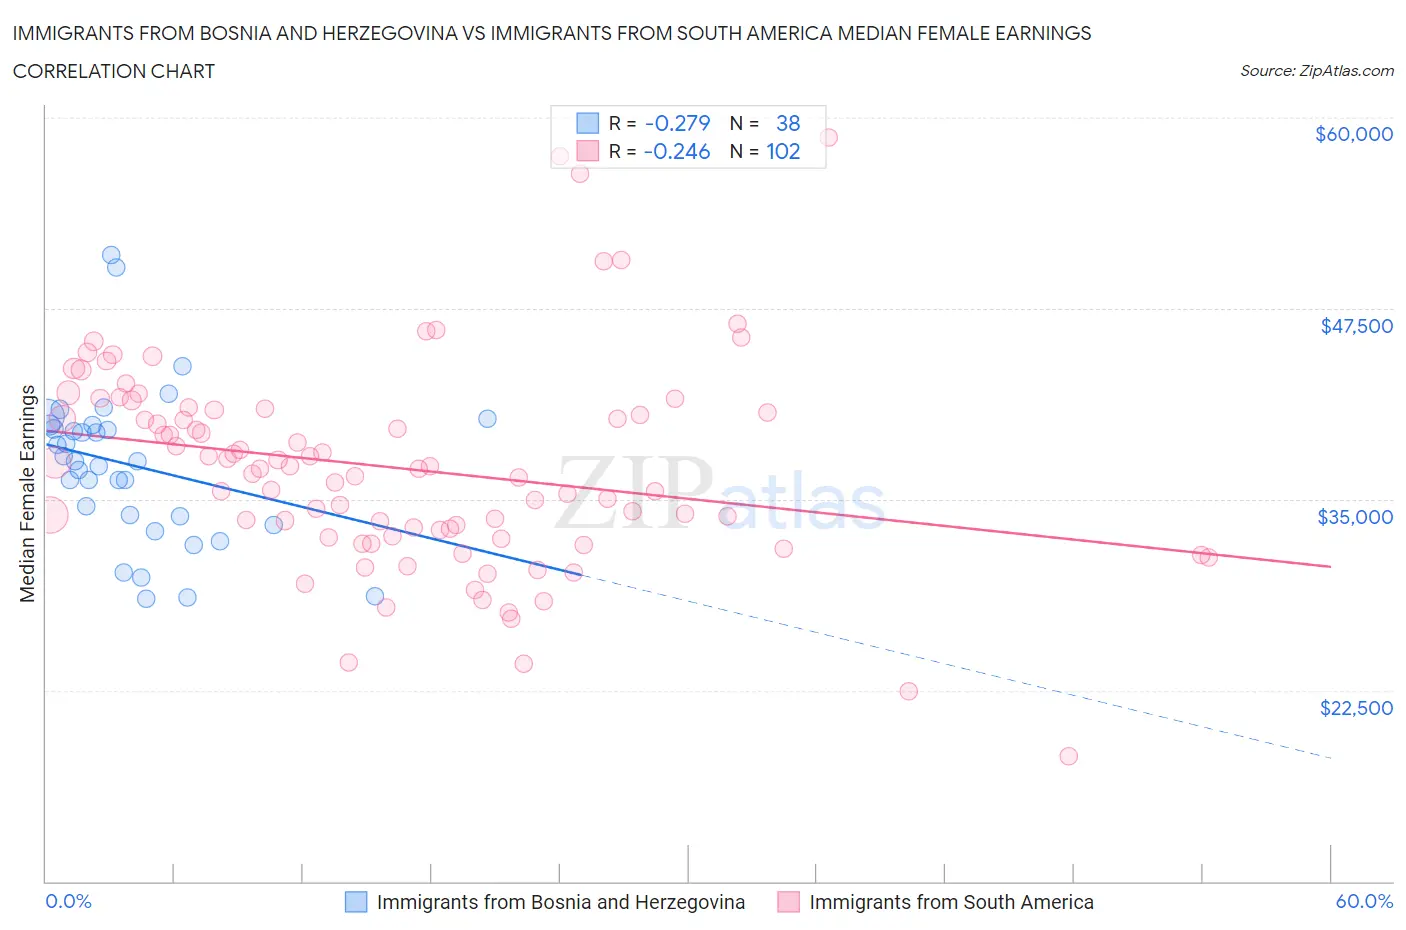 Immigrants from Bosnia and Herzegovina vs Immigrants from South America Median Female Earnings